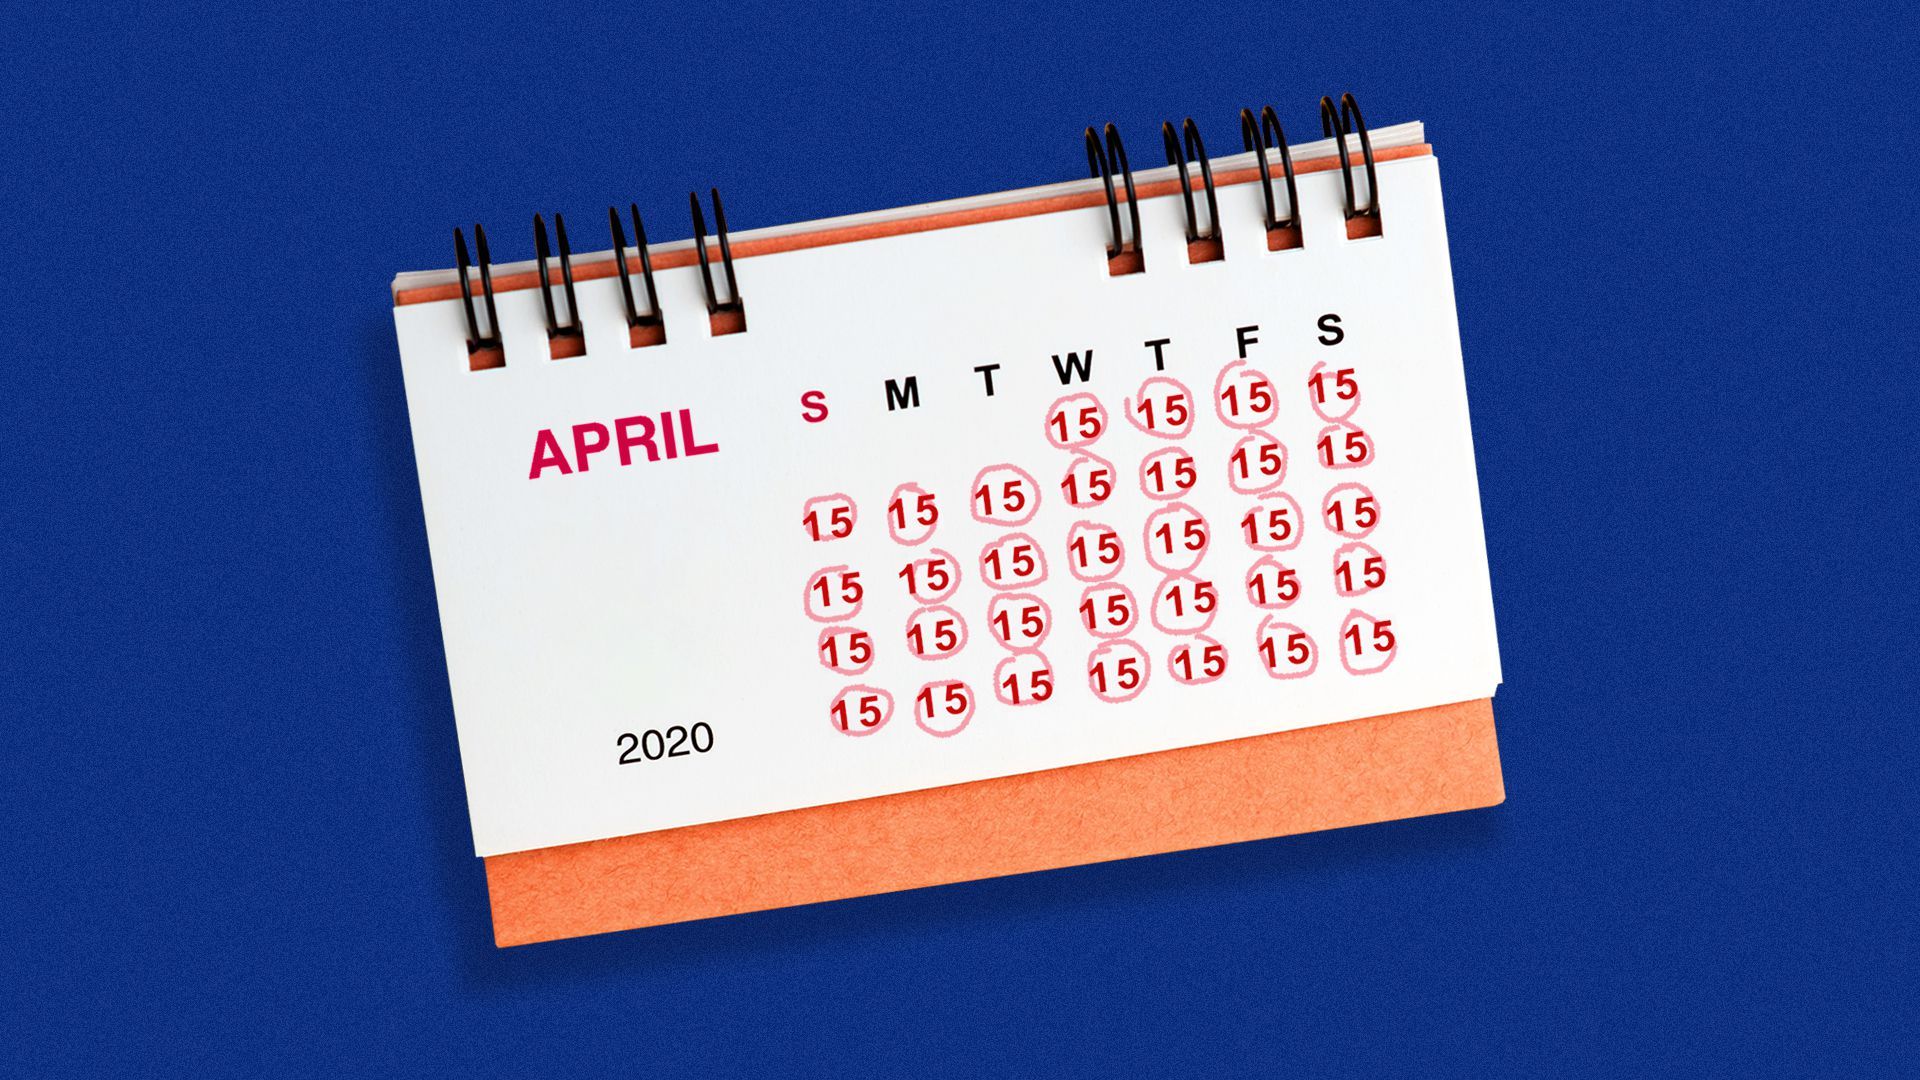 Illustration of an April calendar with all days marked the 15th